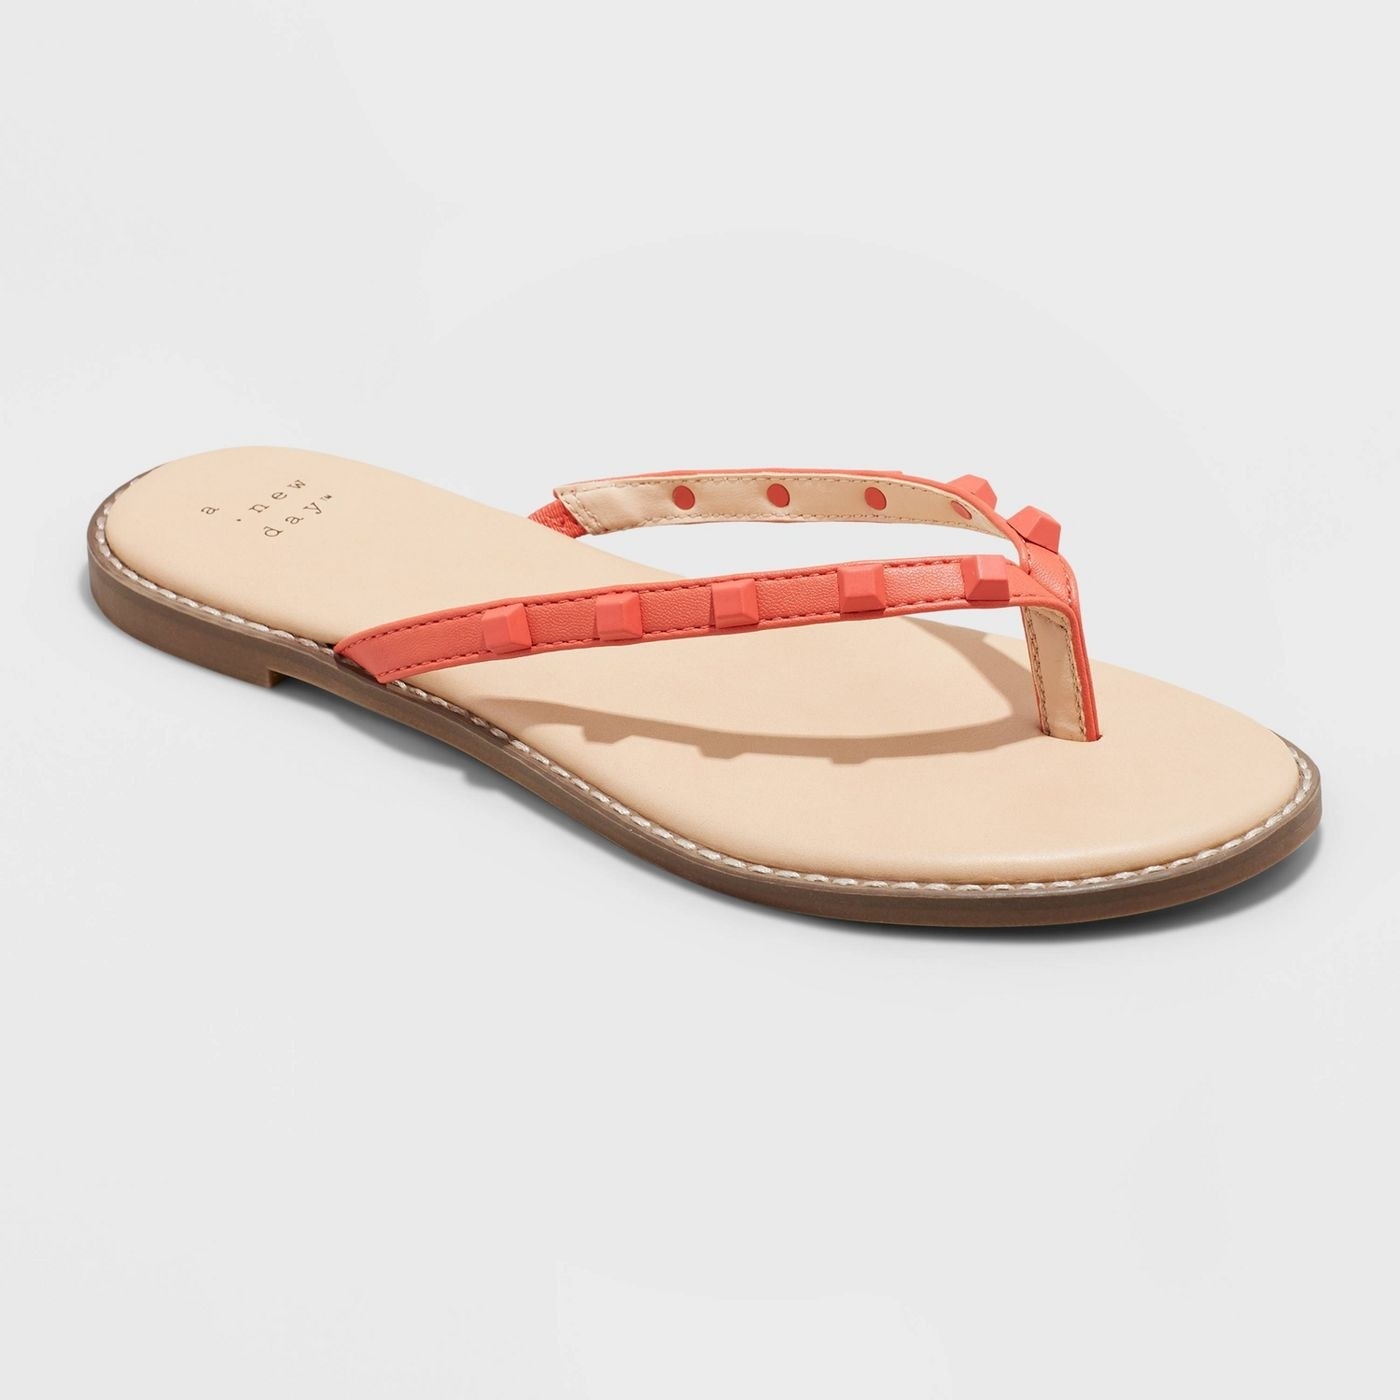 Flip flops with cream sole, coral straps, and coral studs